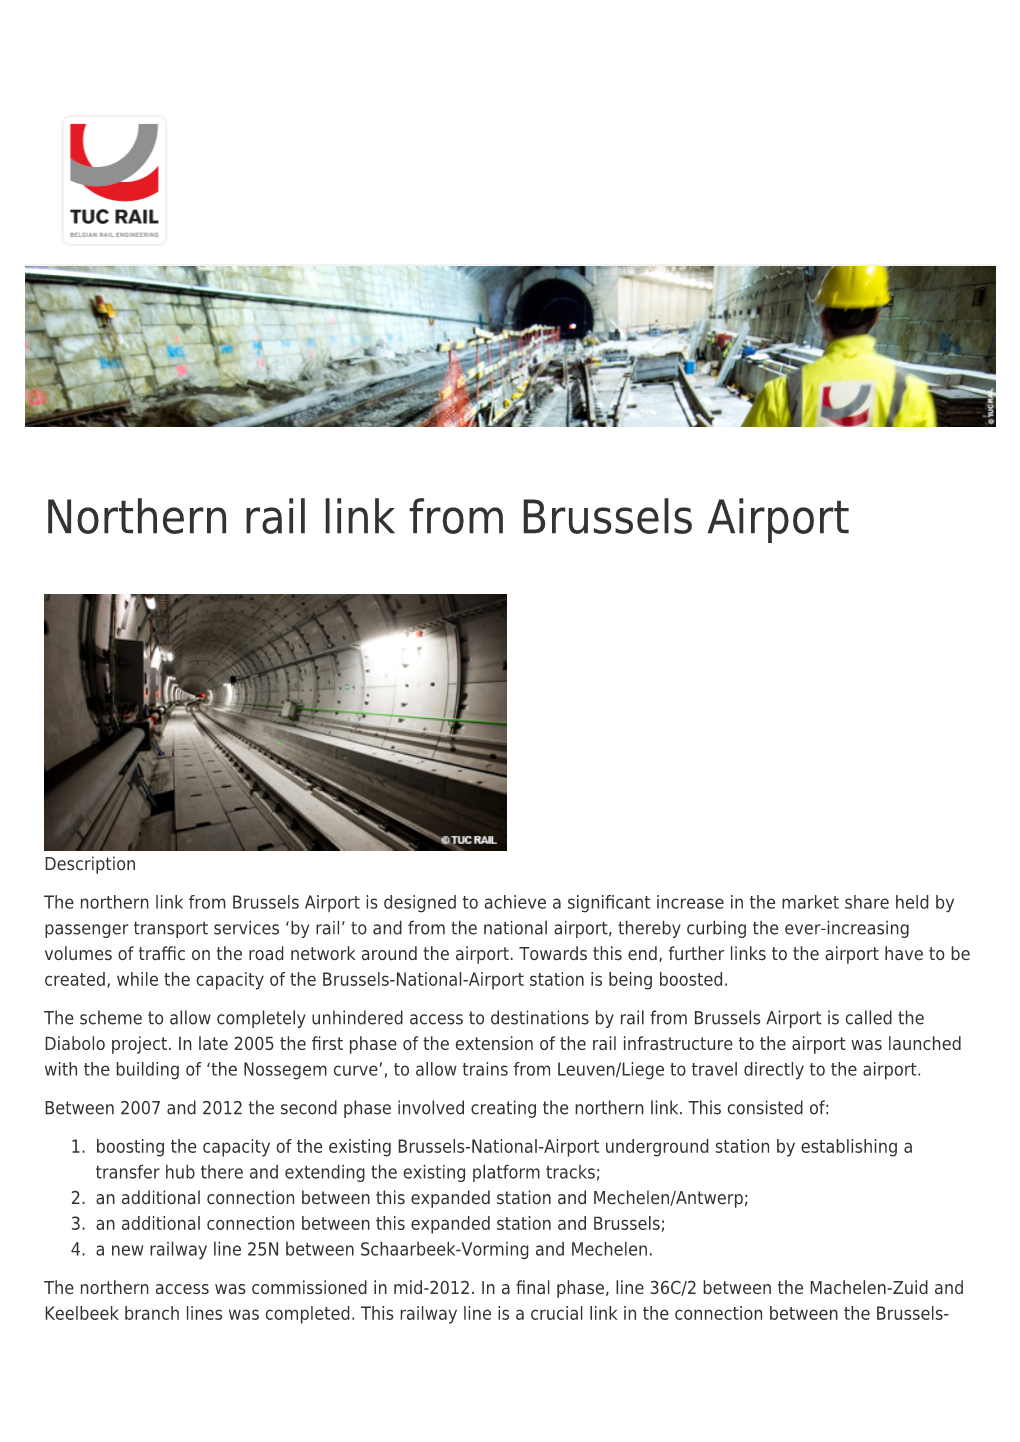 Northern Rail Link from Brussels Airport | TUC RAIL